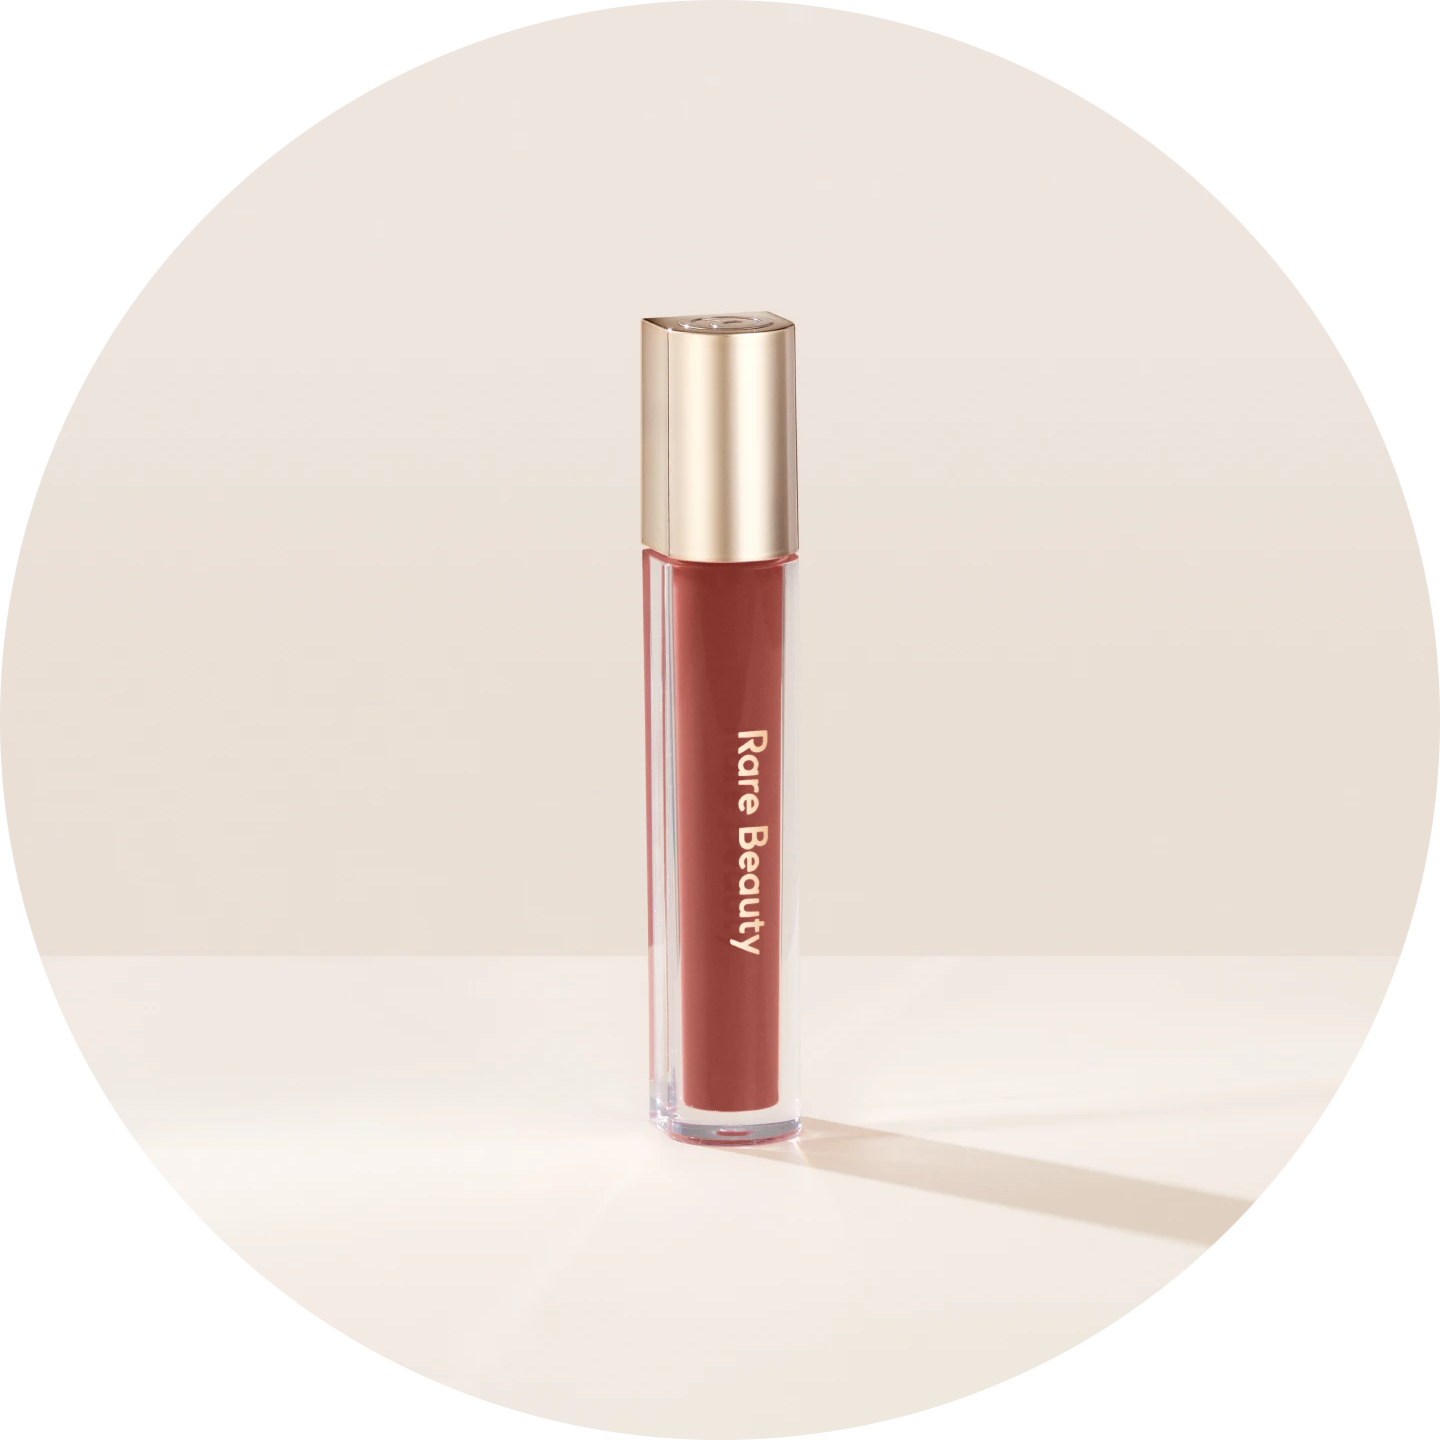 Stay Vulnerable Glossy Lip Balm - NudeFace Chile